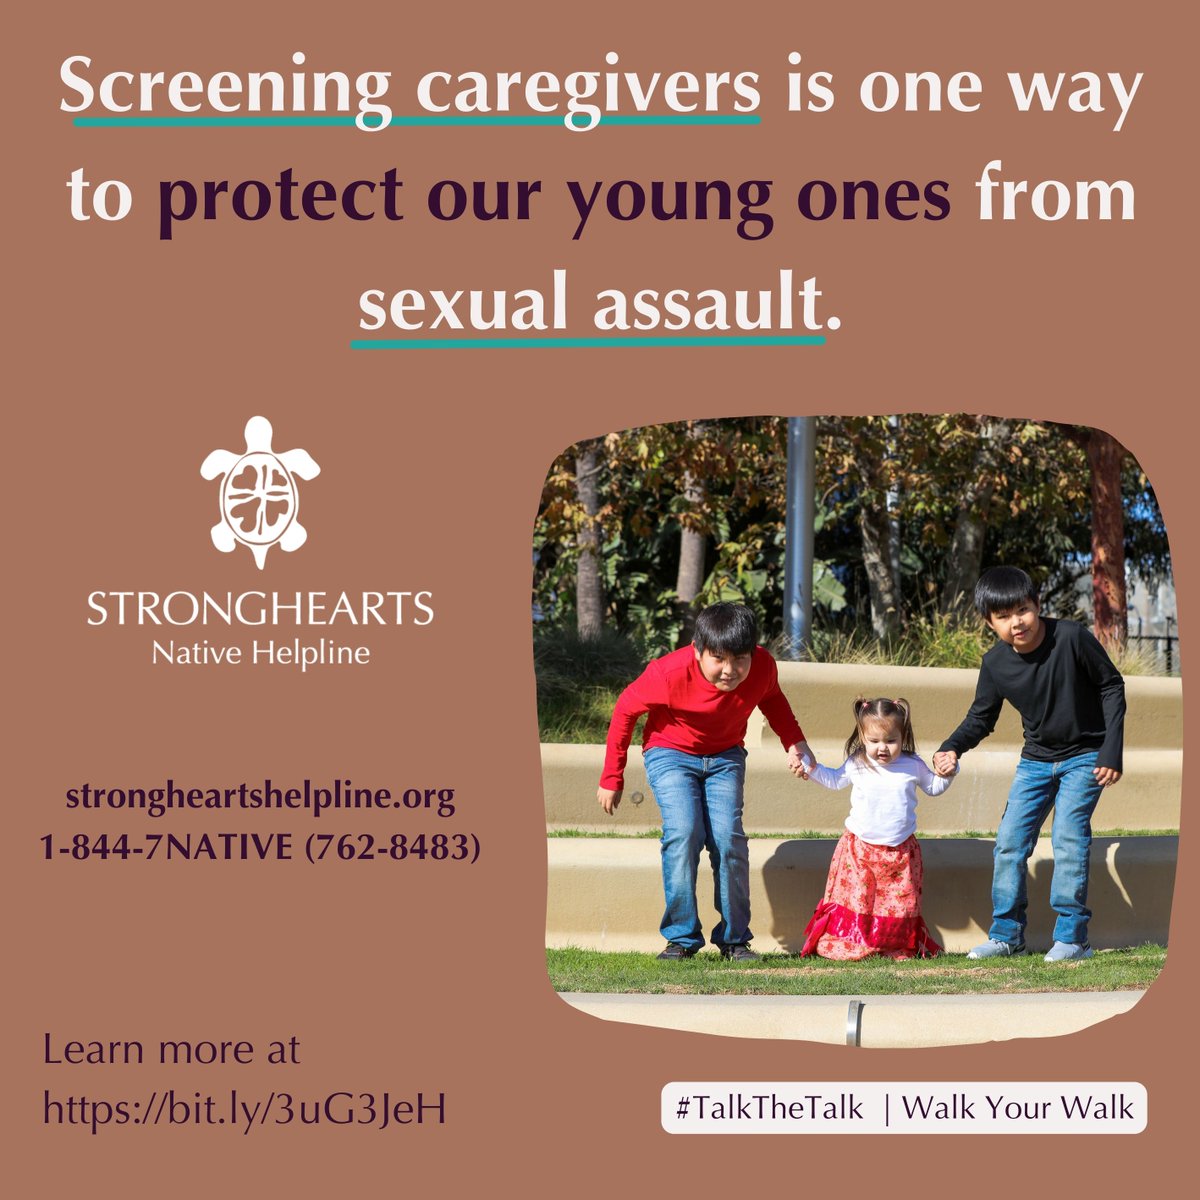 Screening caregivers is one way to protect our young ones from sexual assault. Learn more at bit.ly/3uG3JeH strongheartshelpline.org 1-844-7NATIVE (762-8483) #TalkTheTalk